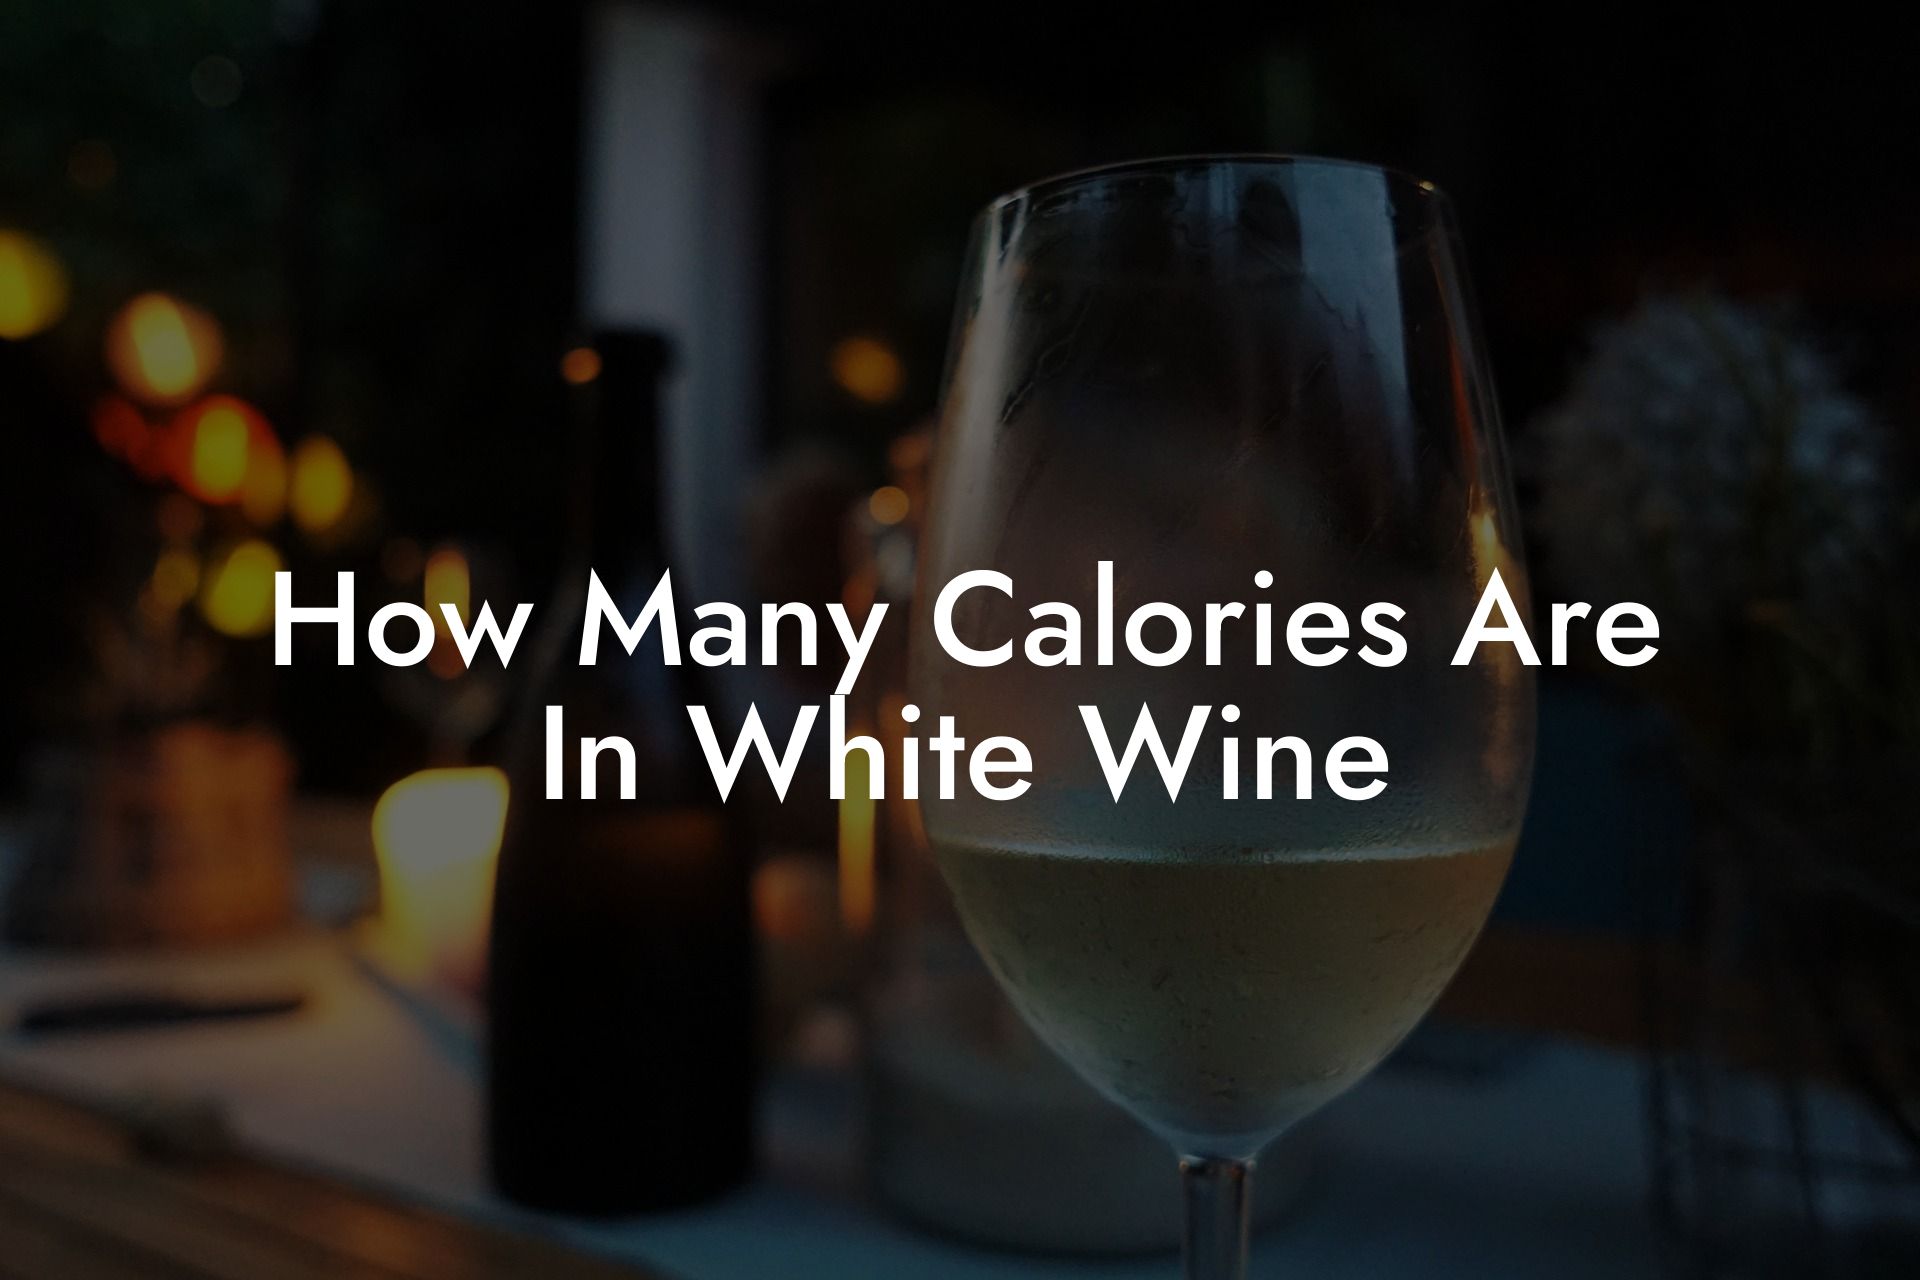 How Many Calories Are In White Wine